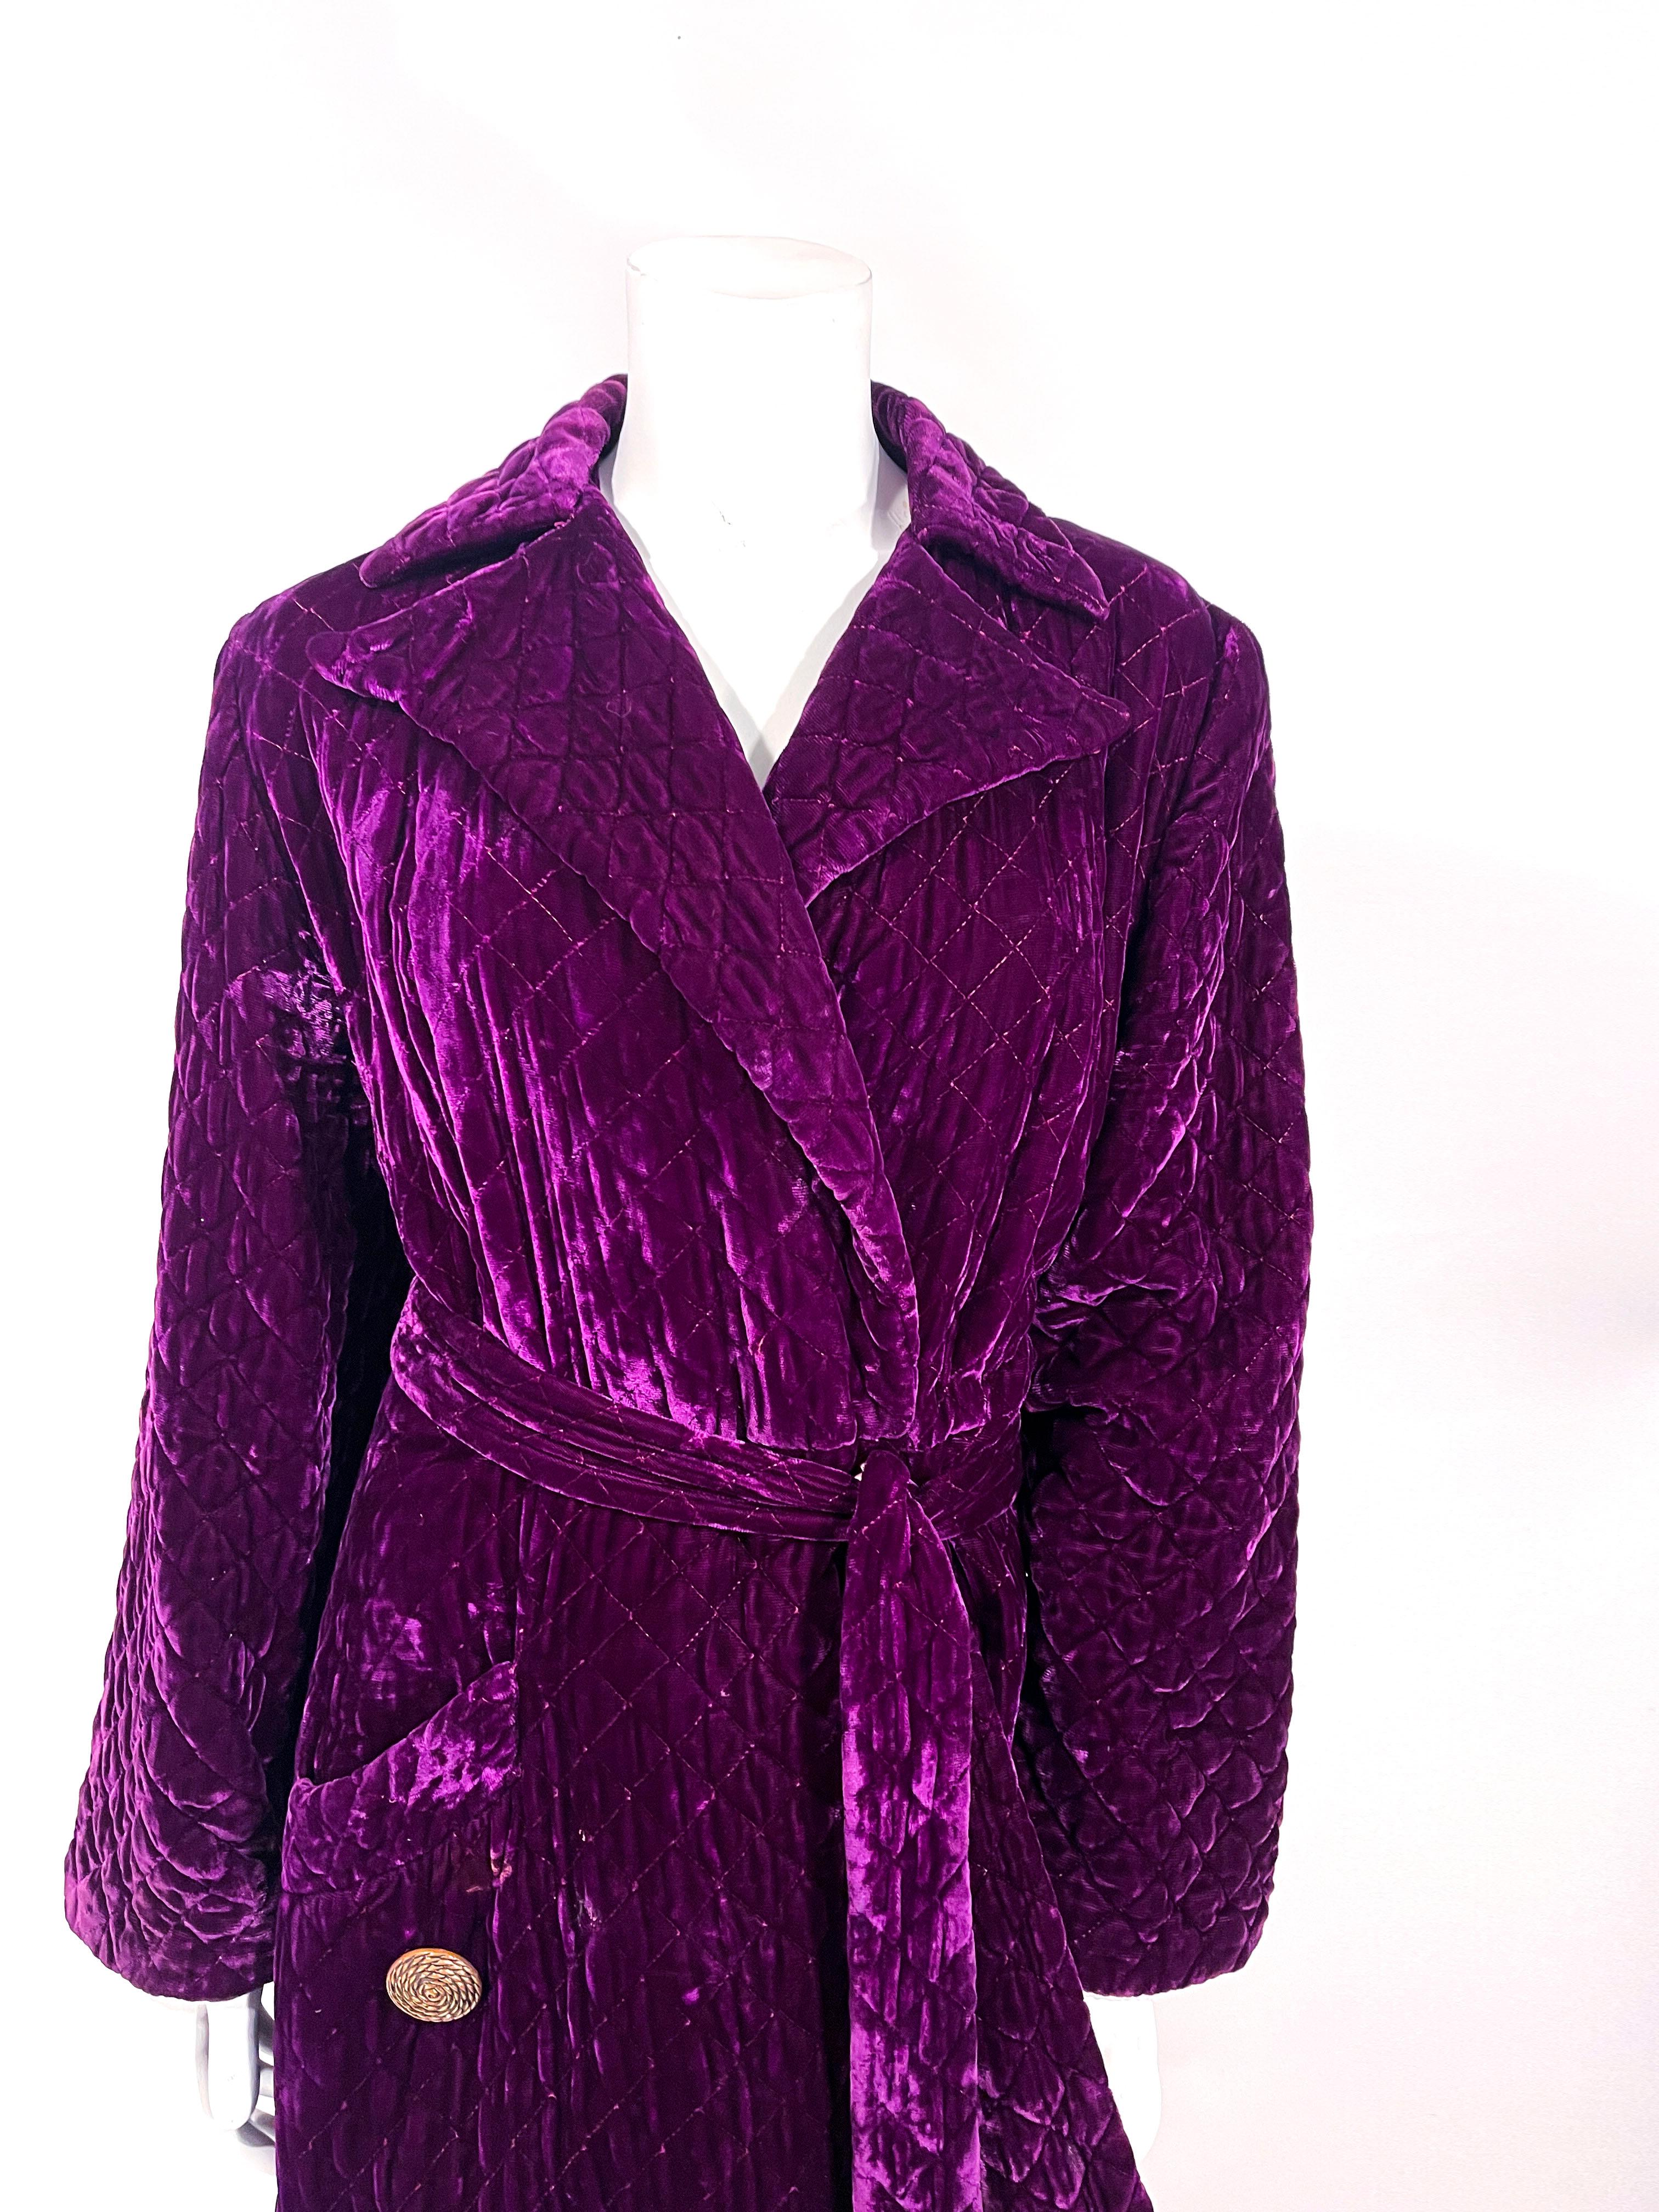 Late 1940s to early 1950s purple crushed velvet quilted house robe with original belt, a single deep patch pocket decorated with a large copper button, padded full-length sleeves, and peak lapel collar. The interior is fully lined with with an inner